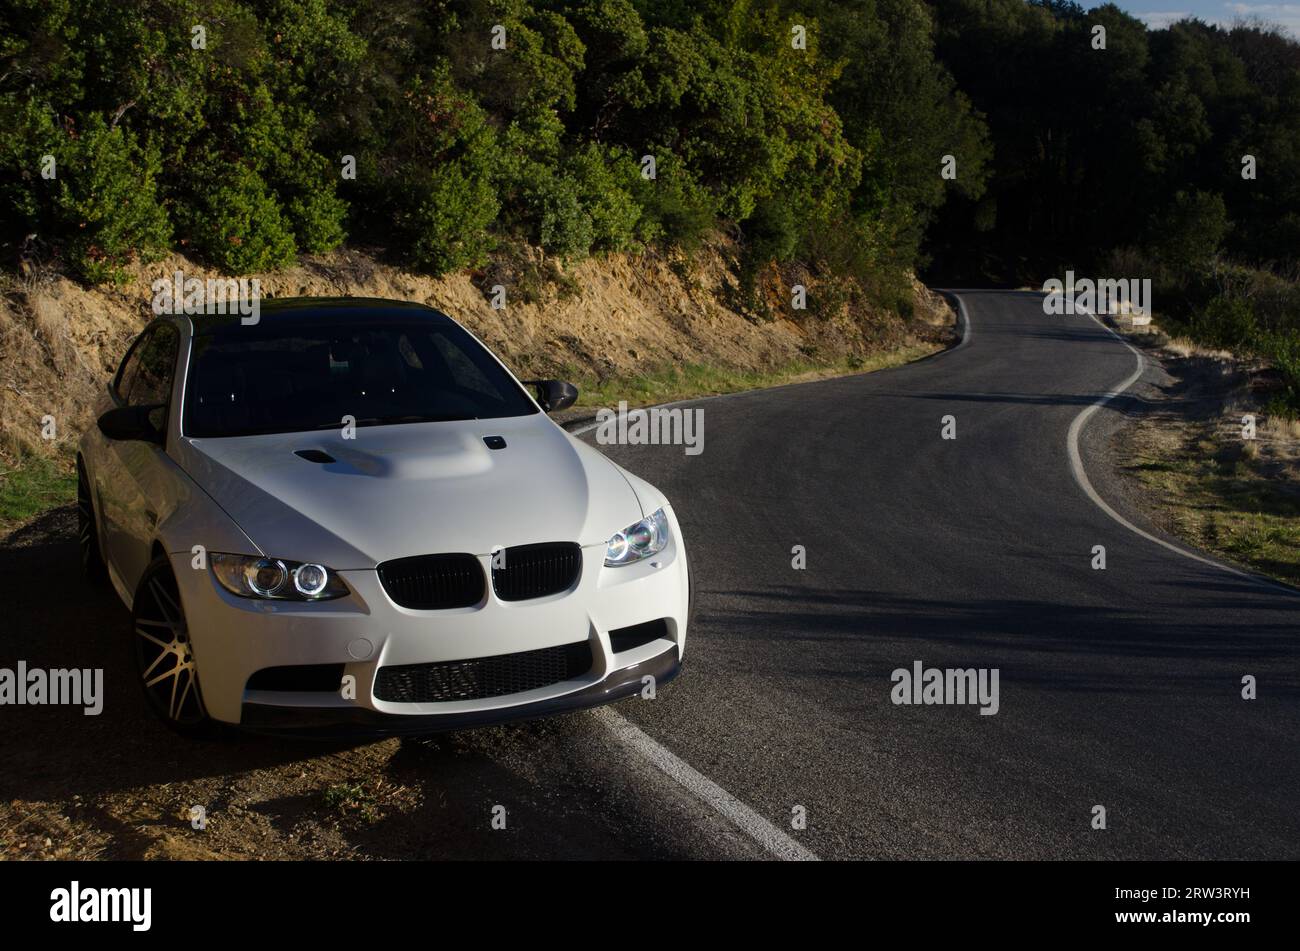 German luxury sport coupe on the shoulder of a curving mountain road Stock Photo